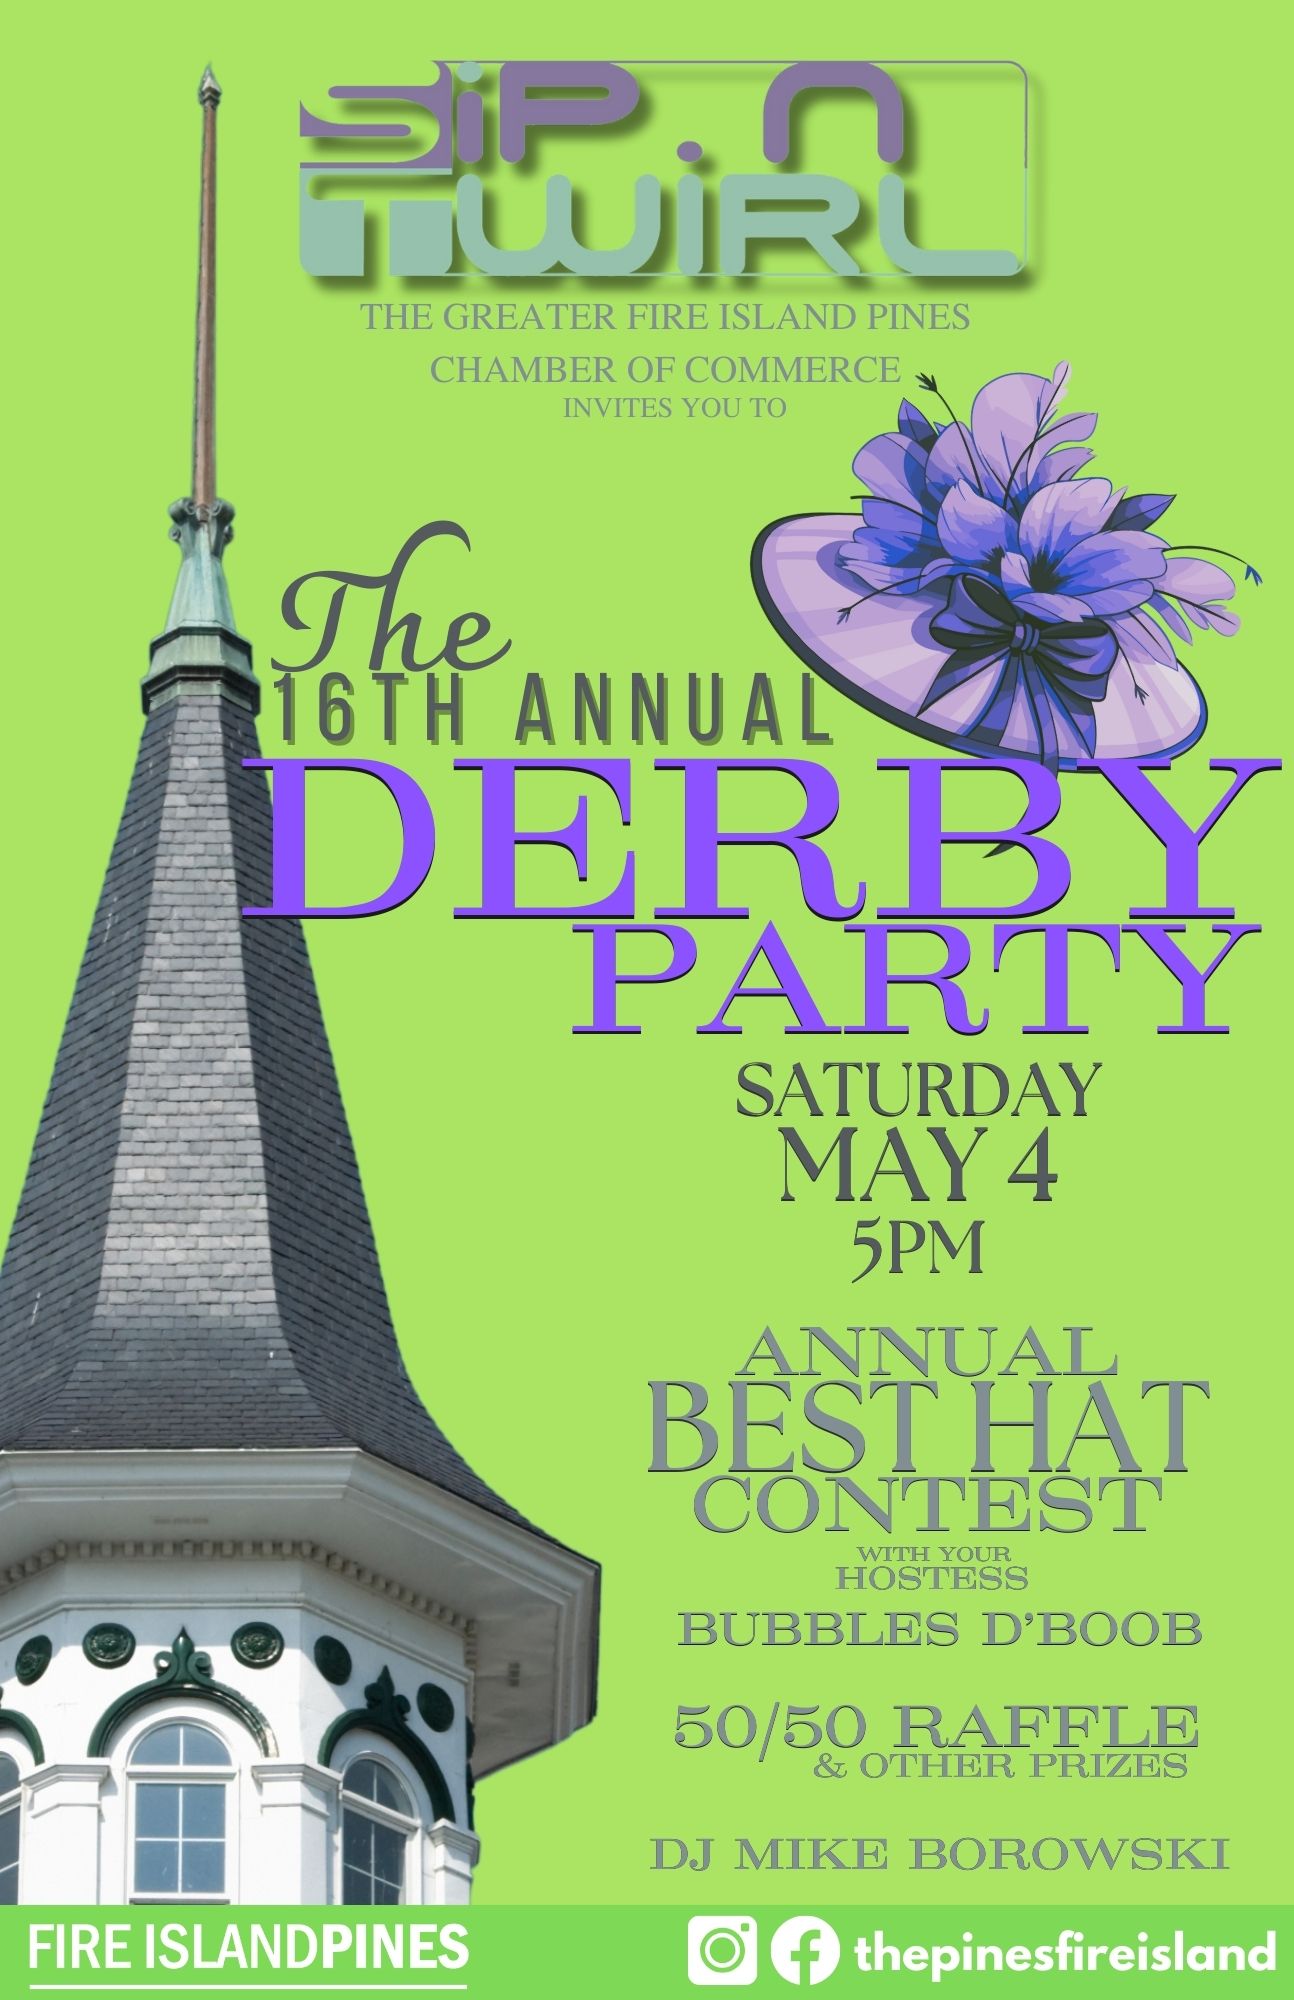 DERBY event poster